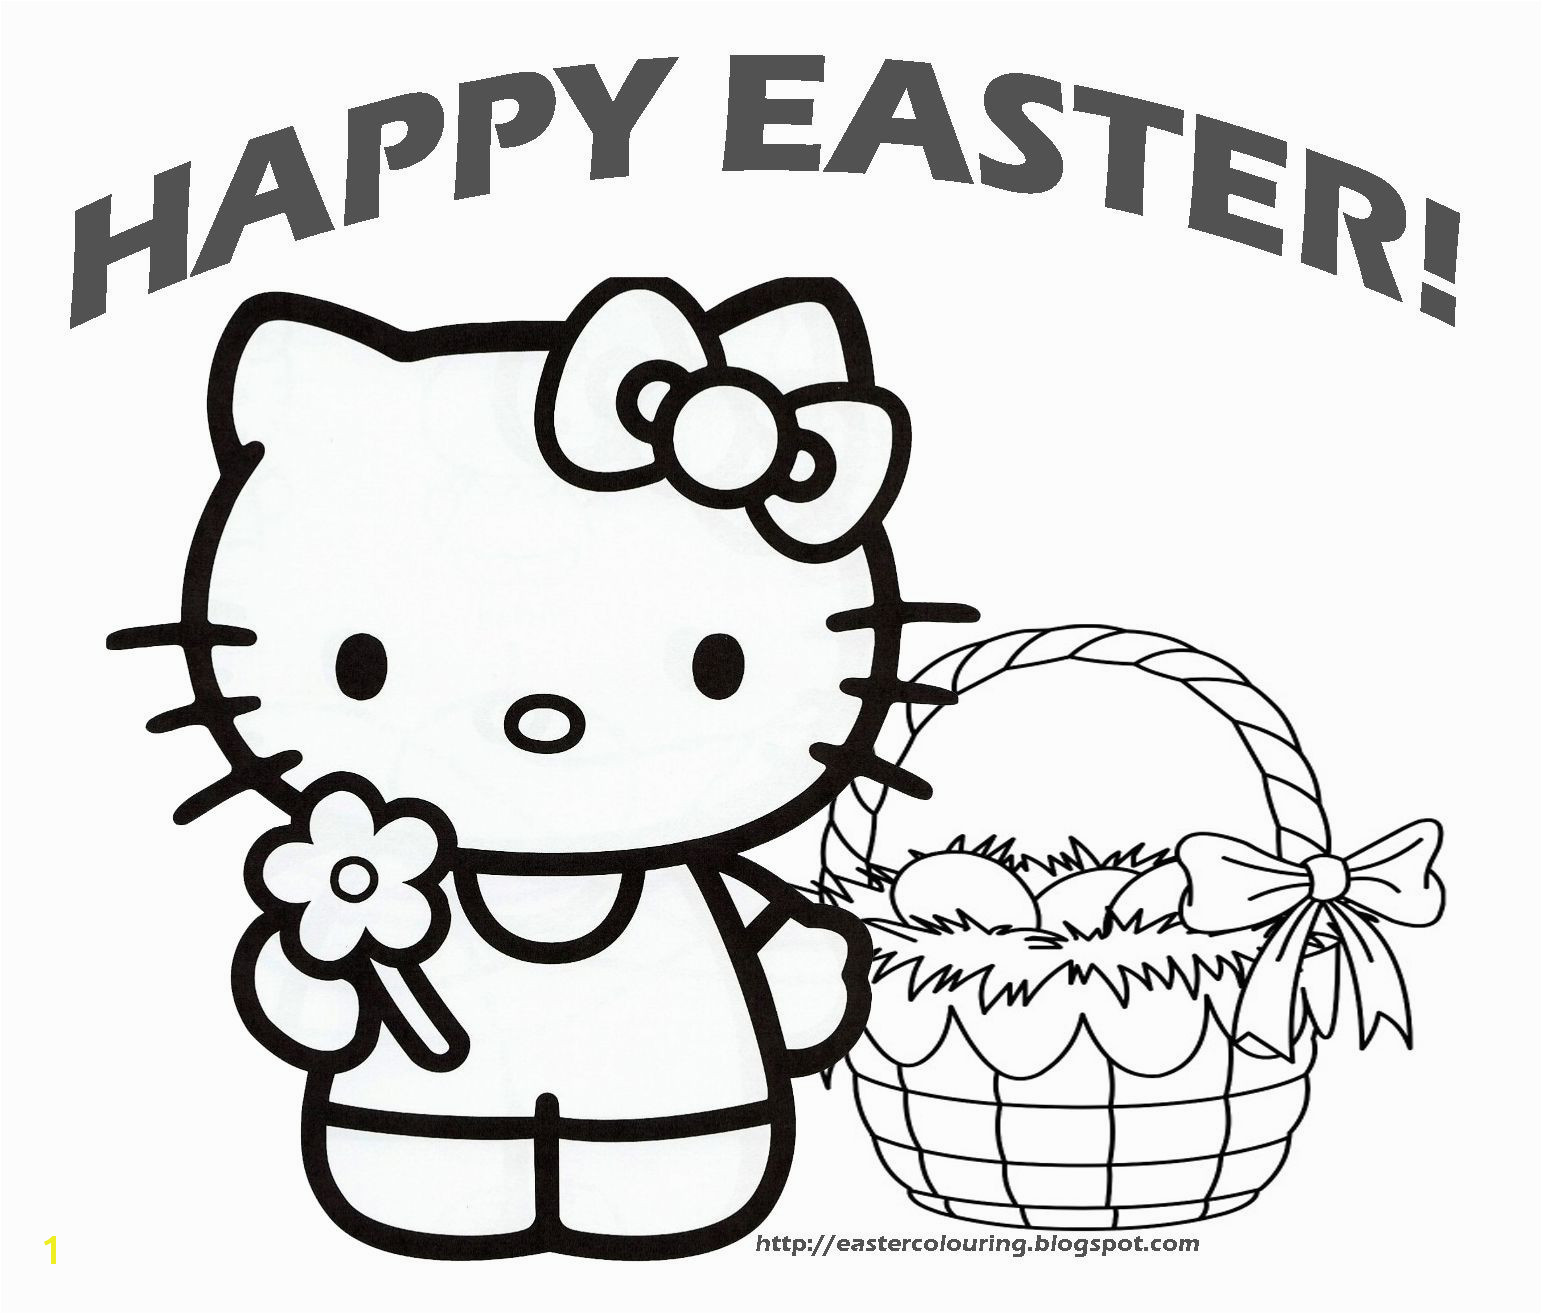 Happy Easter Coloring Pages Free Printable Easter Coloring Pages Free Printable Best Od Dog Coloring Pages